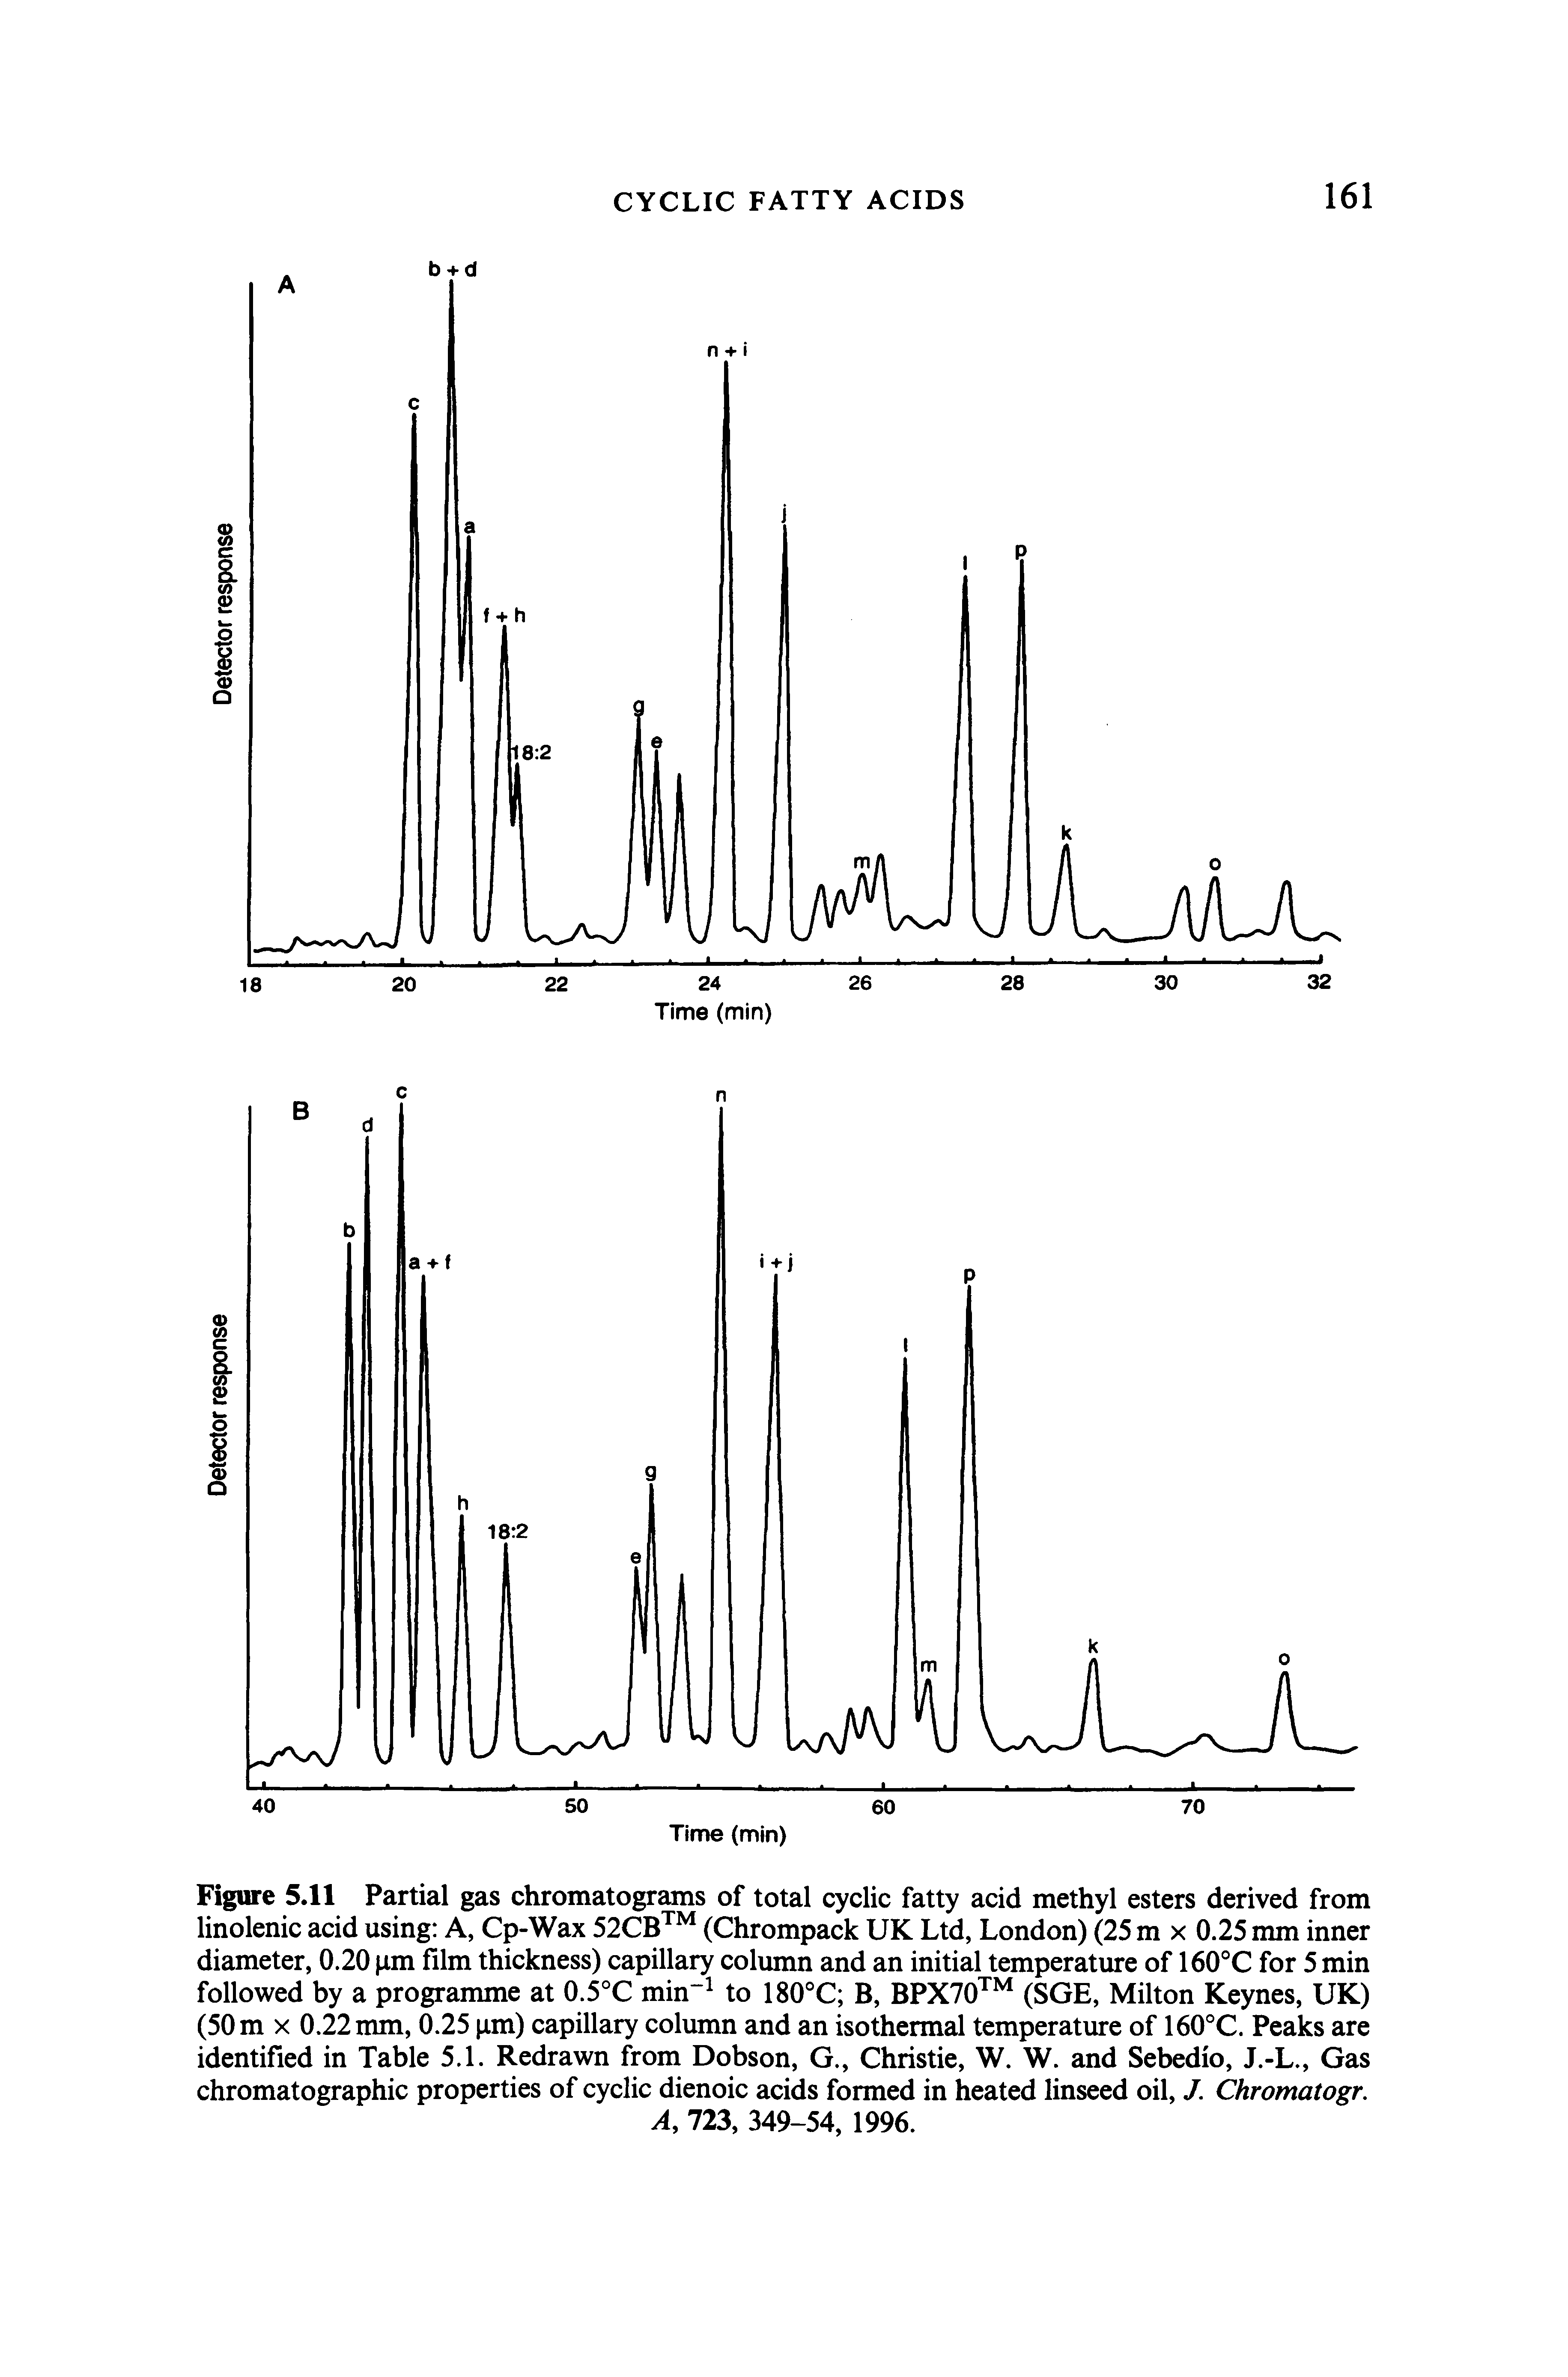 Figure 5.11 Partial gas chromatograms of total cyclic fatty acid methyl esters derived from linolenic acid using A, Cp-Wax 52CB (Chrompack UK Ltd, London) (25 m x 0.25 mm inner diameter, 0.20 pm film thickness) capillary column and an initial temperature of 160°C for 5 min followed by a programme at 0.5°C min to 180°C B, BPX70 (SGE, Milton Keynes, UK) (50 m X 0.22 mm, 0.25 pm) capillary column and an isothermal temperature of 160°C. Peaks are identified in Table 5.1. Redrawn from Dobson, G., Christie, W. W. and Sebedio, J.-L., Gas chromatographic properties of cyclic dienoic acids formed in heated linseed oil, J. Chromatogr.